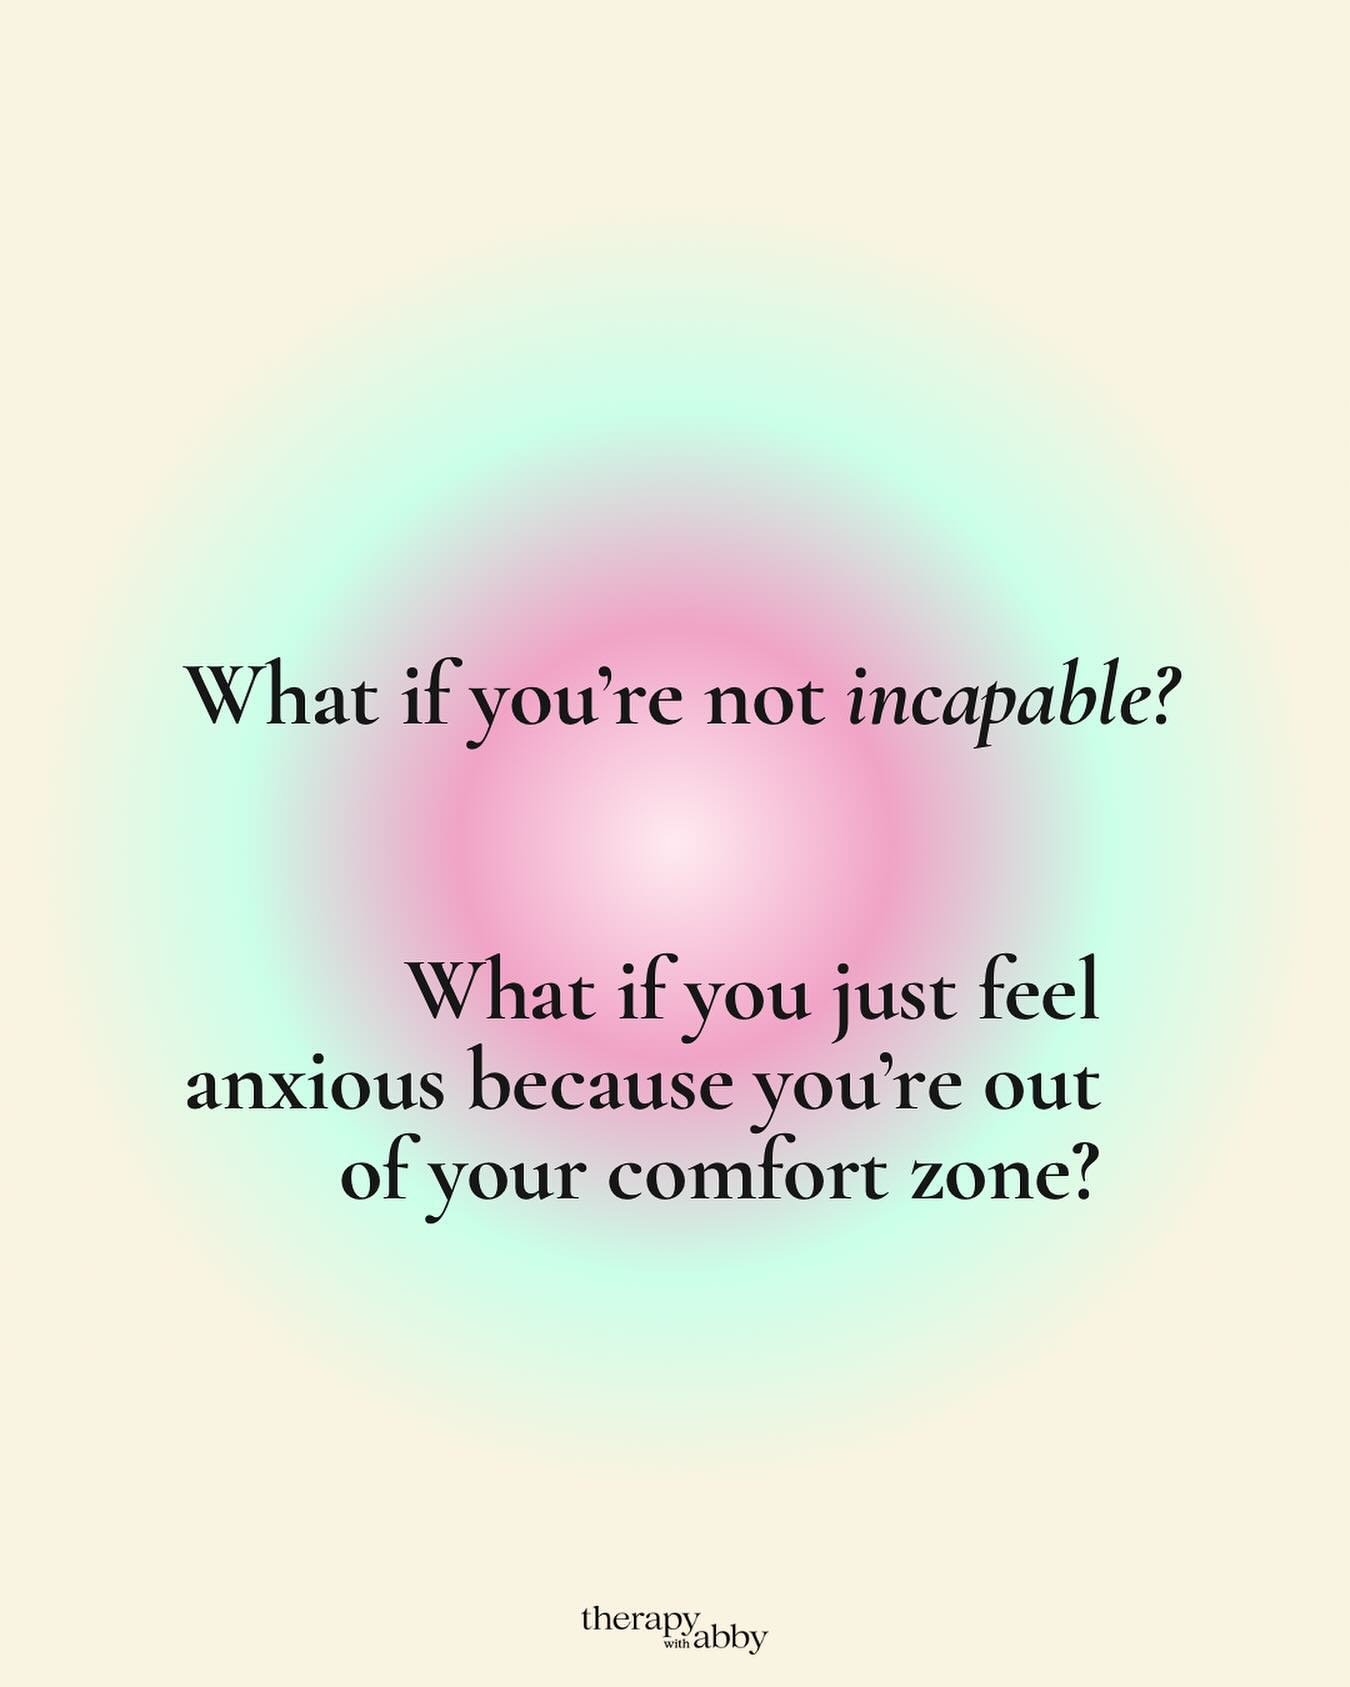 If you&rsquo;ve ever felt like you&rsquo;re out of your depth or not good enough, remember this: everyone feels anxious when they step outside their comfort zone.

Unfortunately, some of us misinterpret this anxiety as a sign of fraudulence or incapa